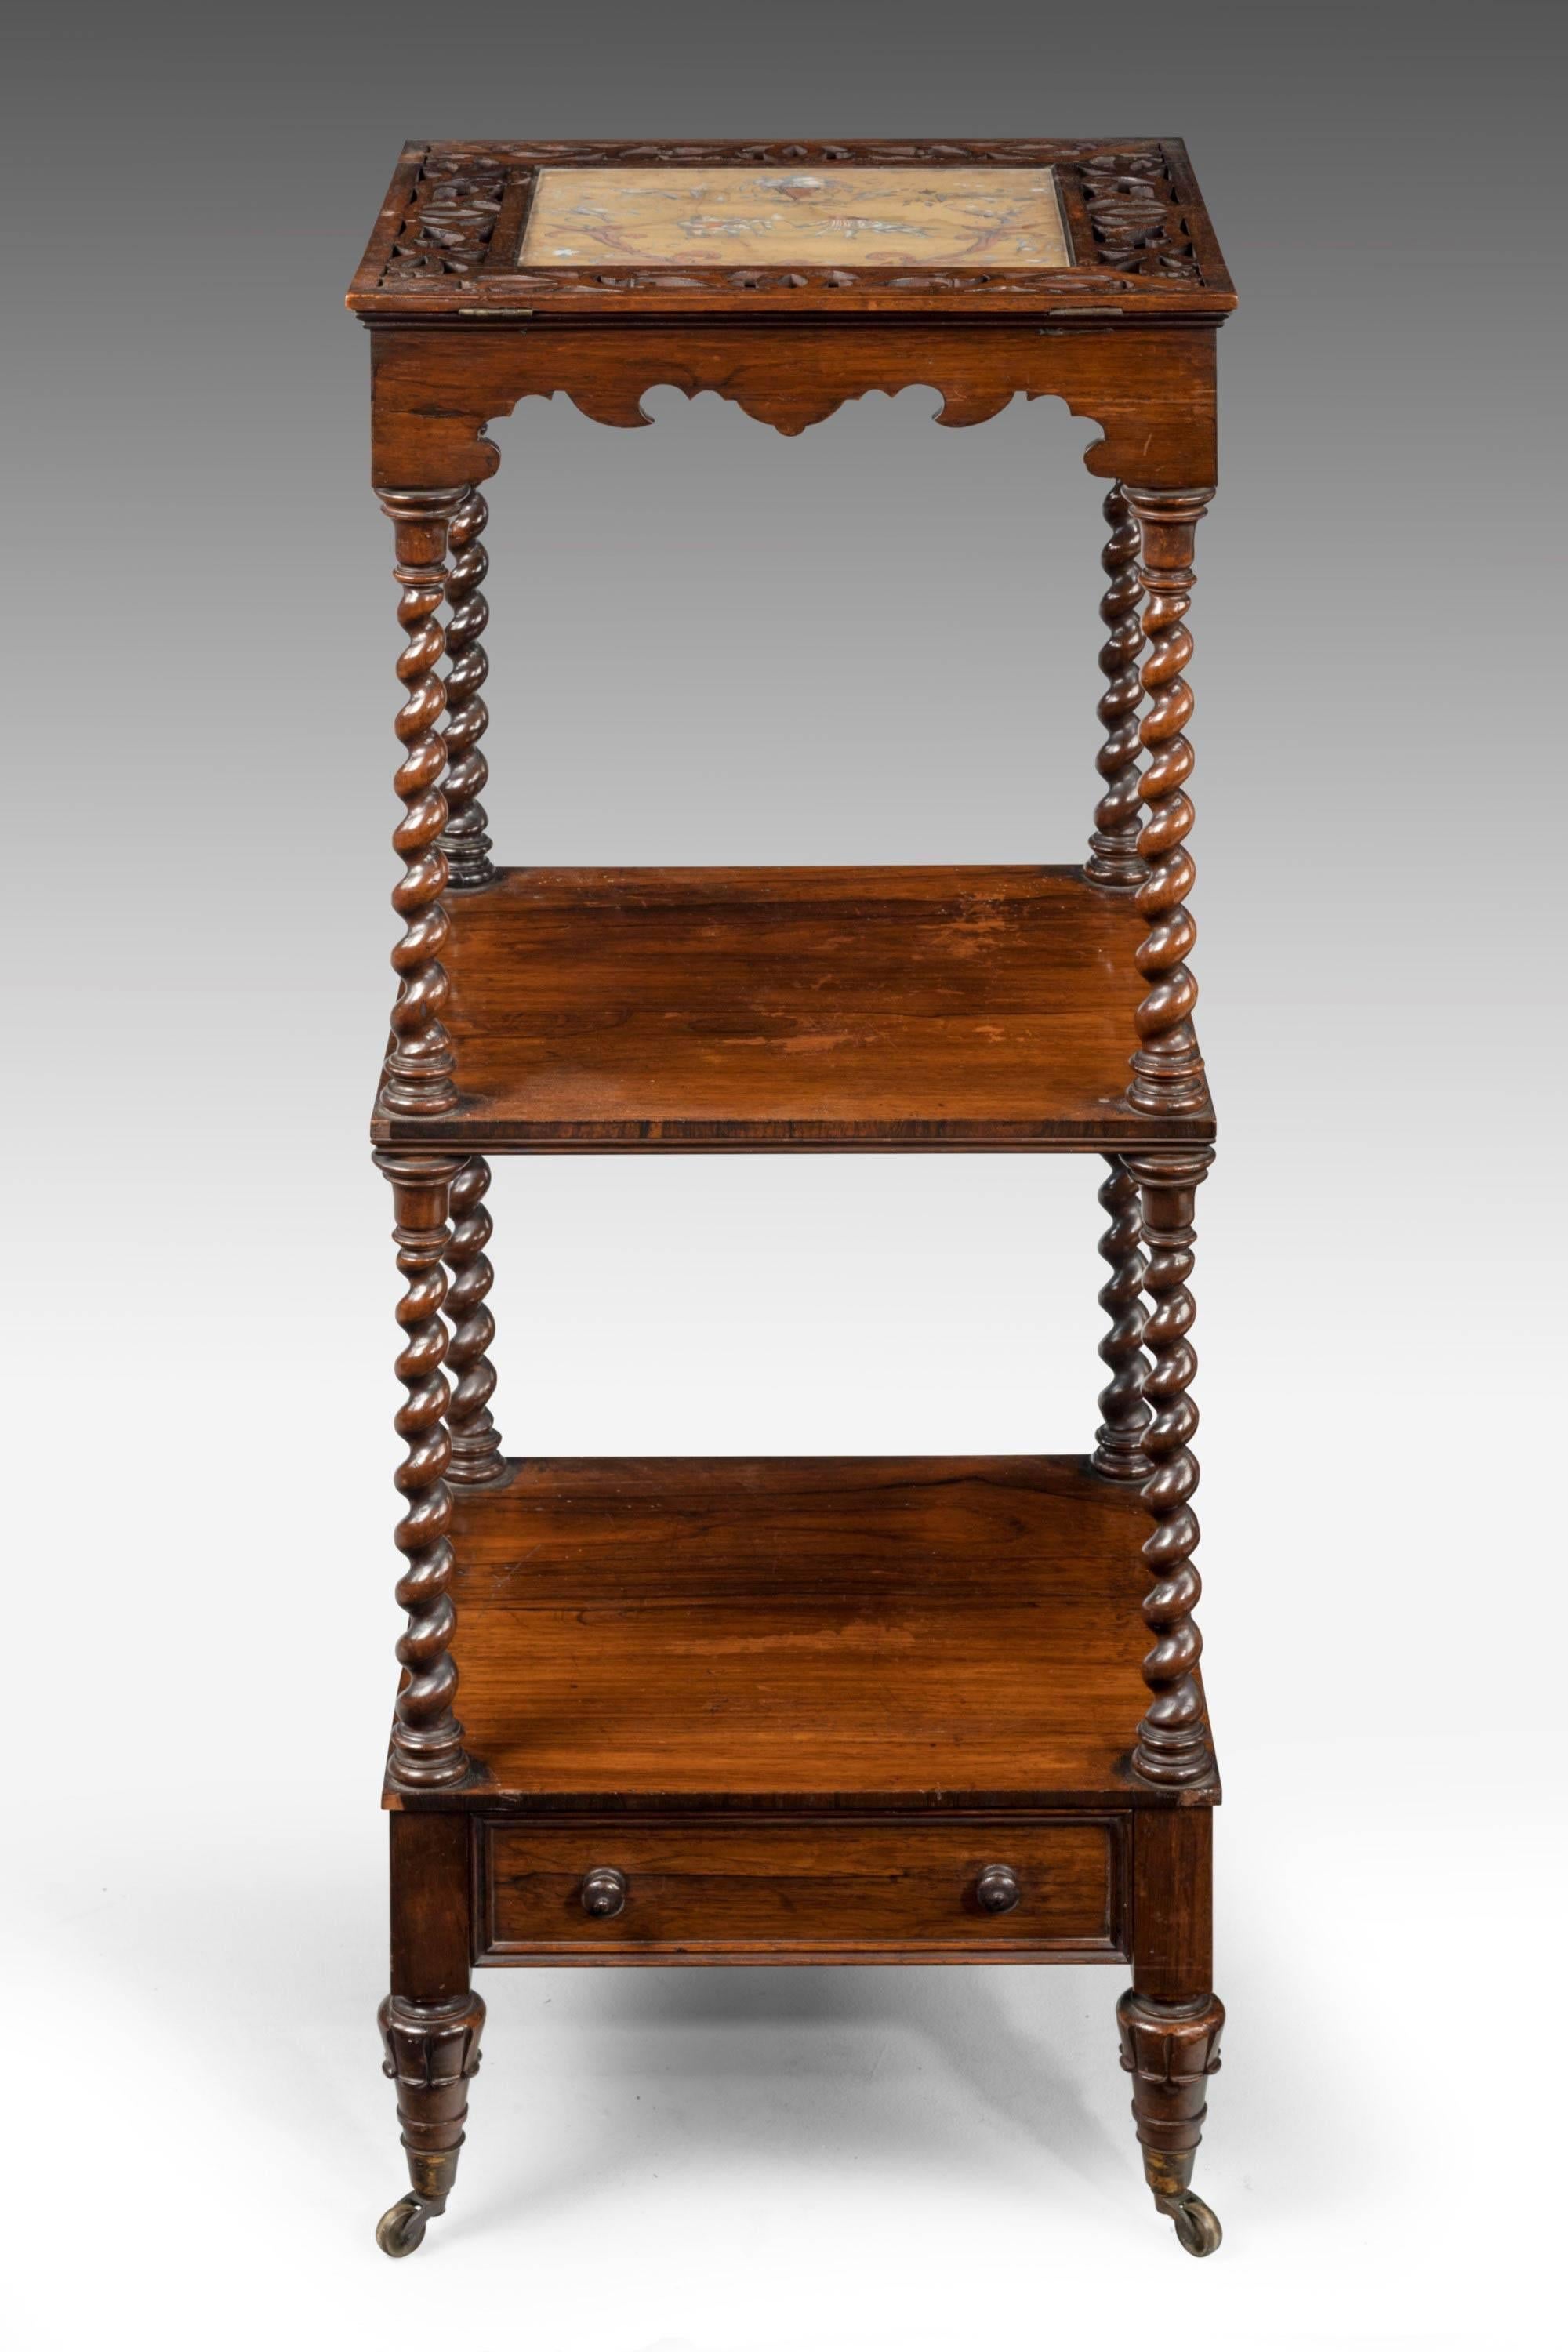 A most unusual 19th century  three tier whatnot. Finely turned baluster uprights. The top with an inset silk panel contained in a pierced border, on a ratchet for adjustment when reading. The base with a single drawer.